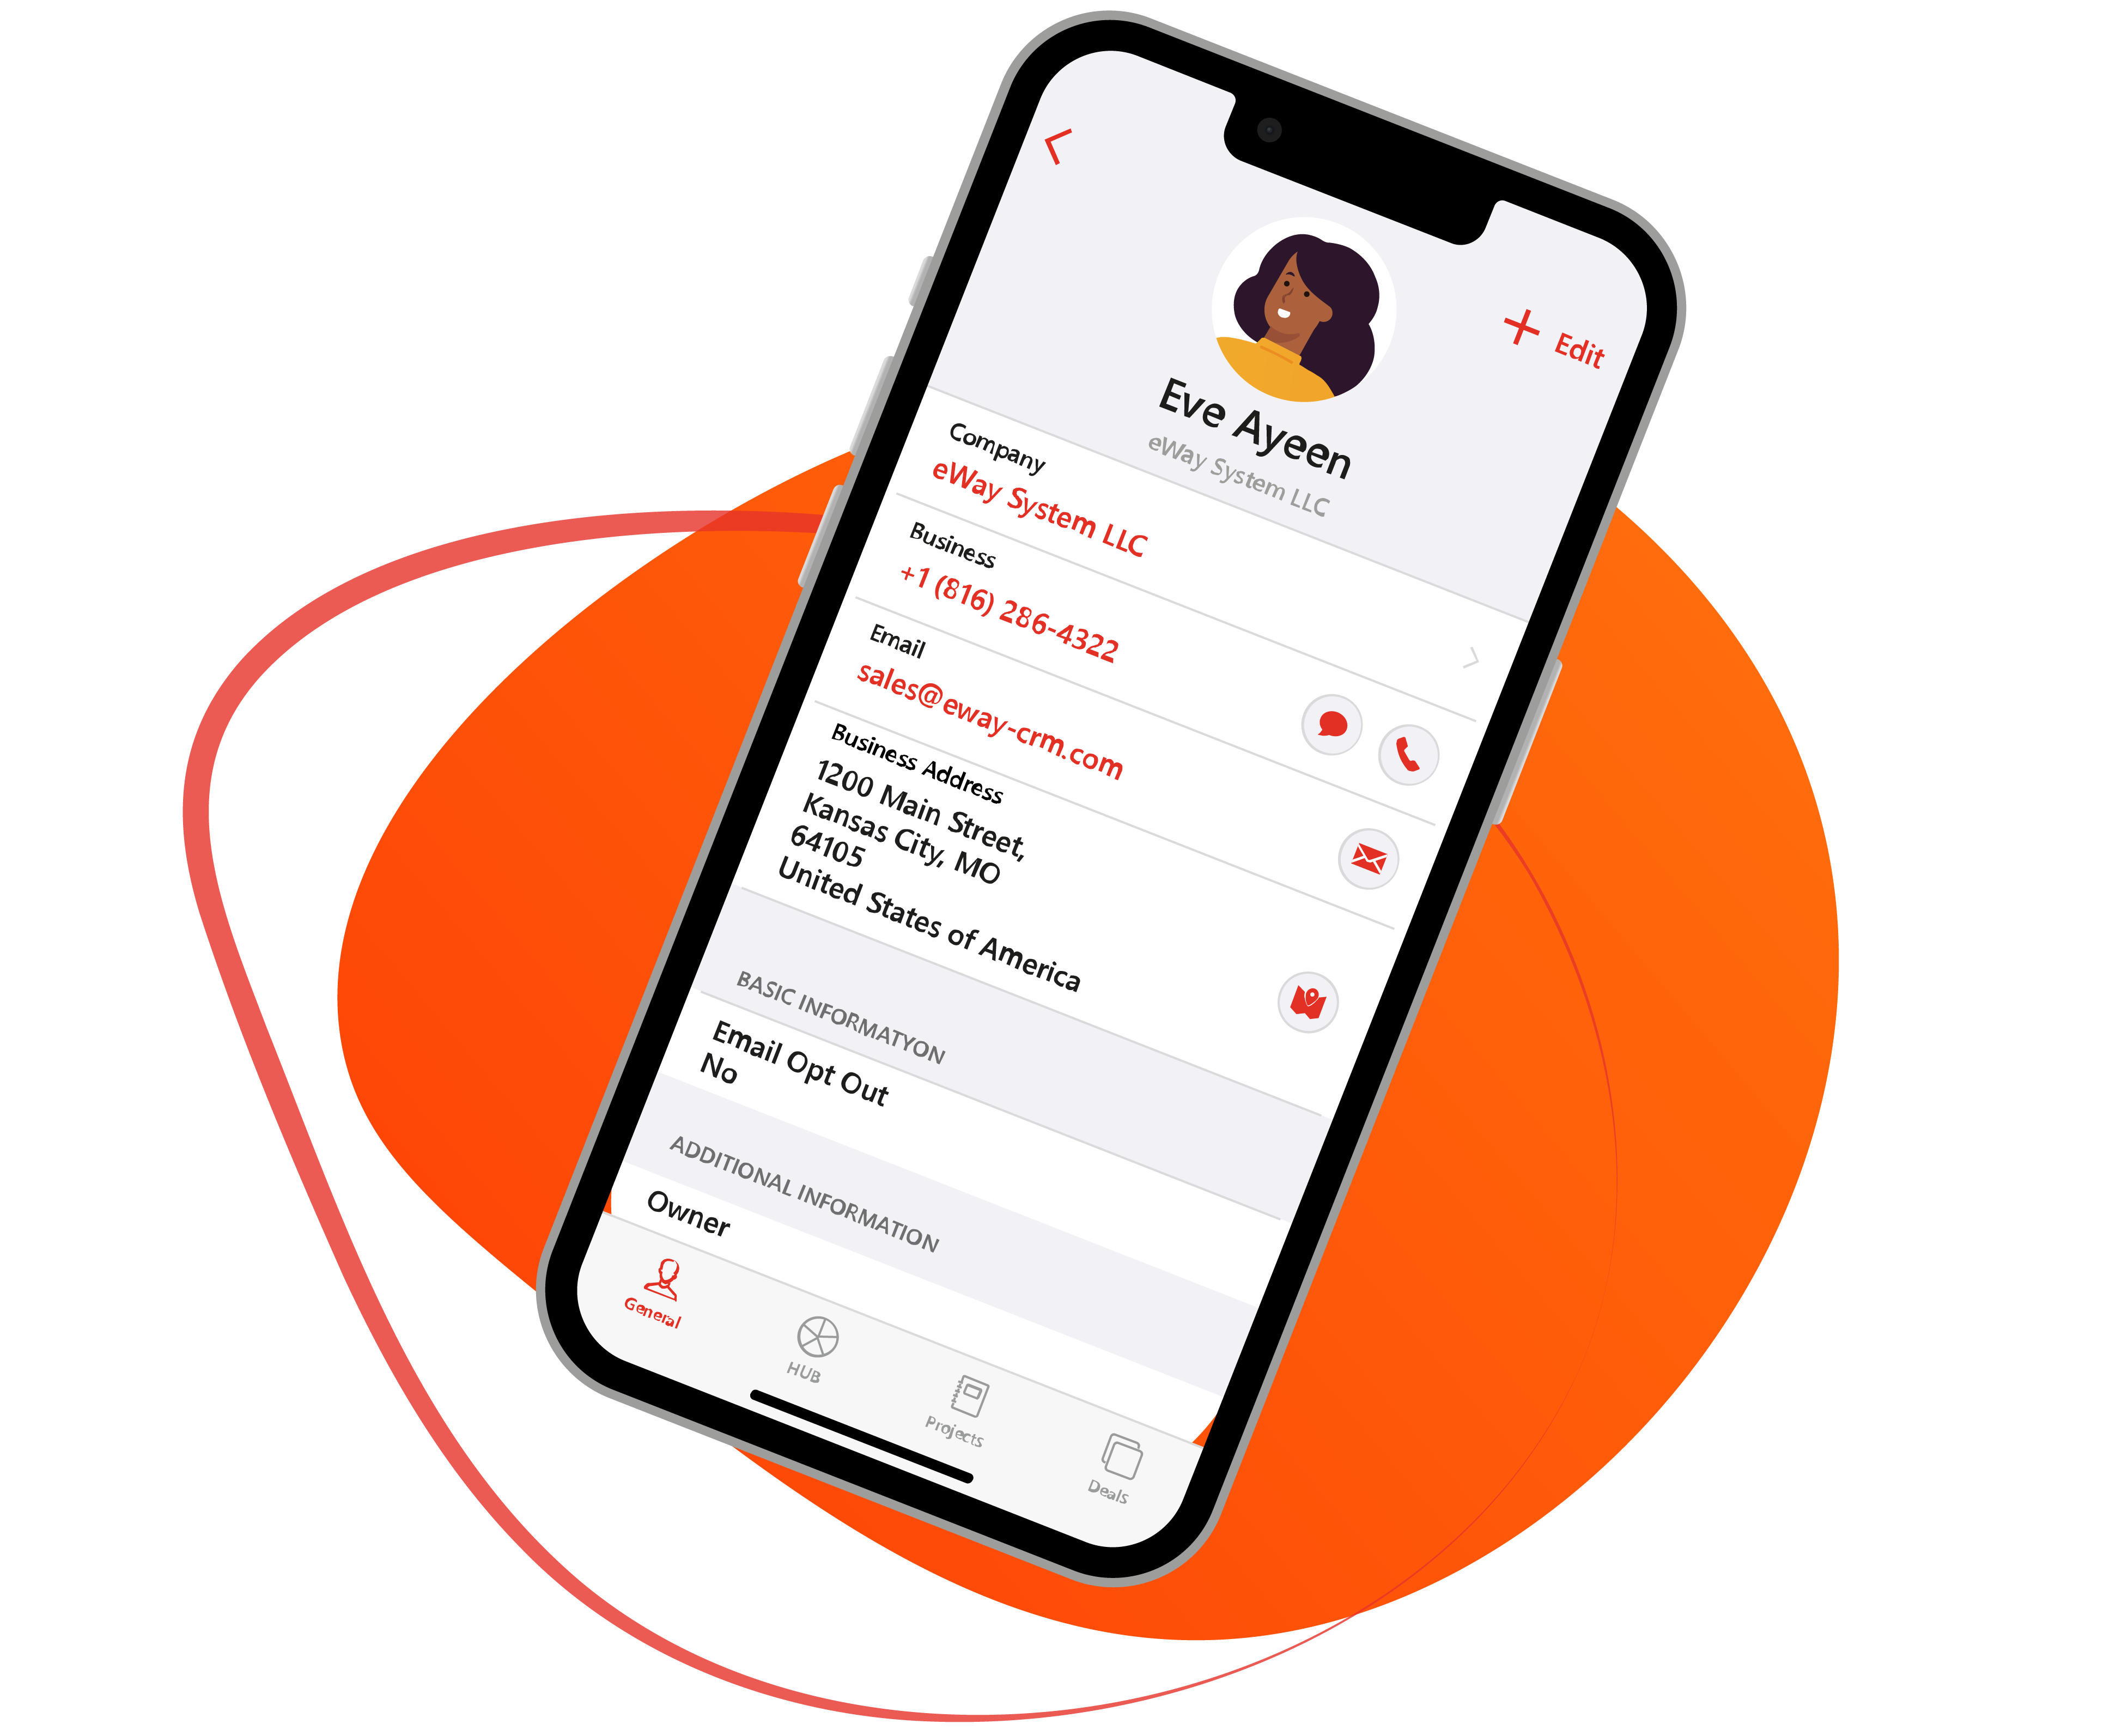 eWay-CRM Software - Our mobile app helps you be effective on the go. All data is automatically synced to your smartphone so you can work even offline. That's right. If you are somewhere with poor internet, eWay-CRM Mobile still works like a charm.